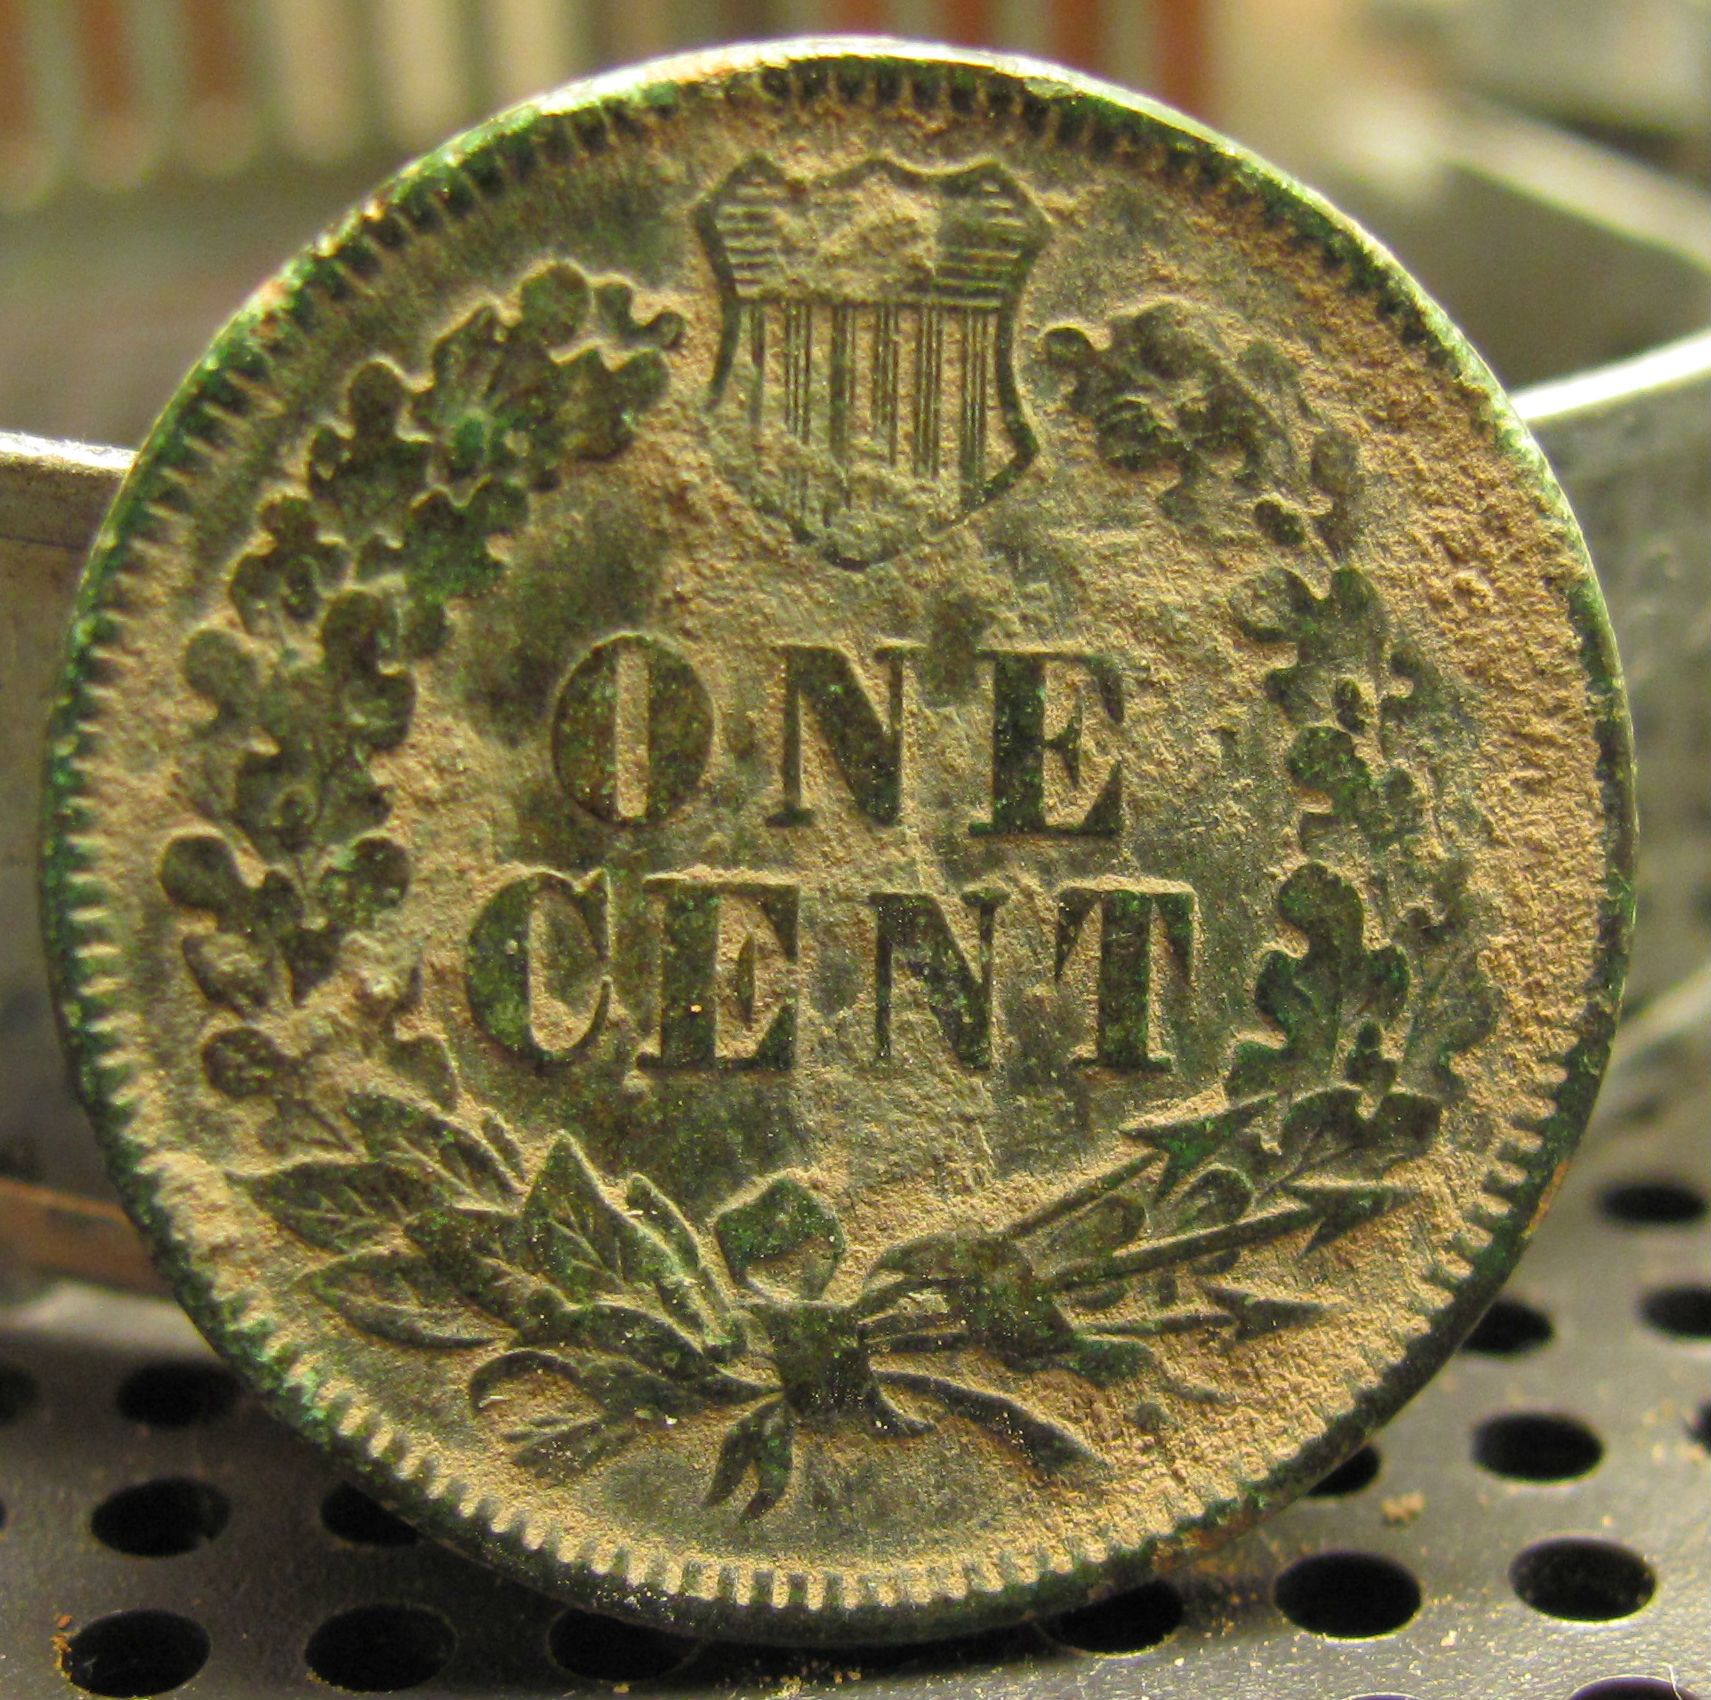 Good detail to the reverse side of a 1893 indian cent.
Oct. 2012